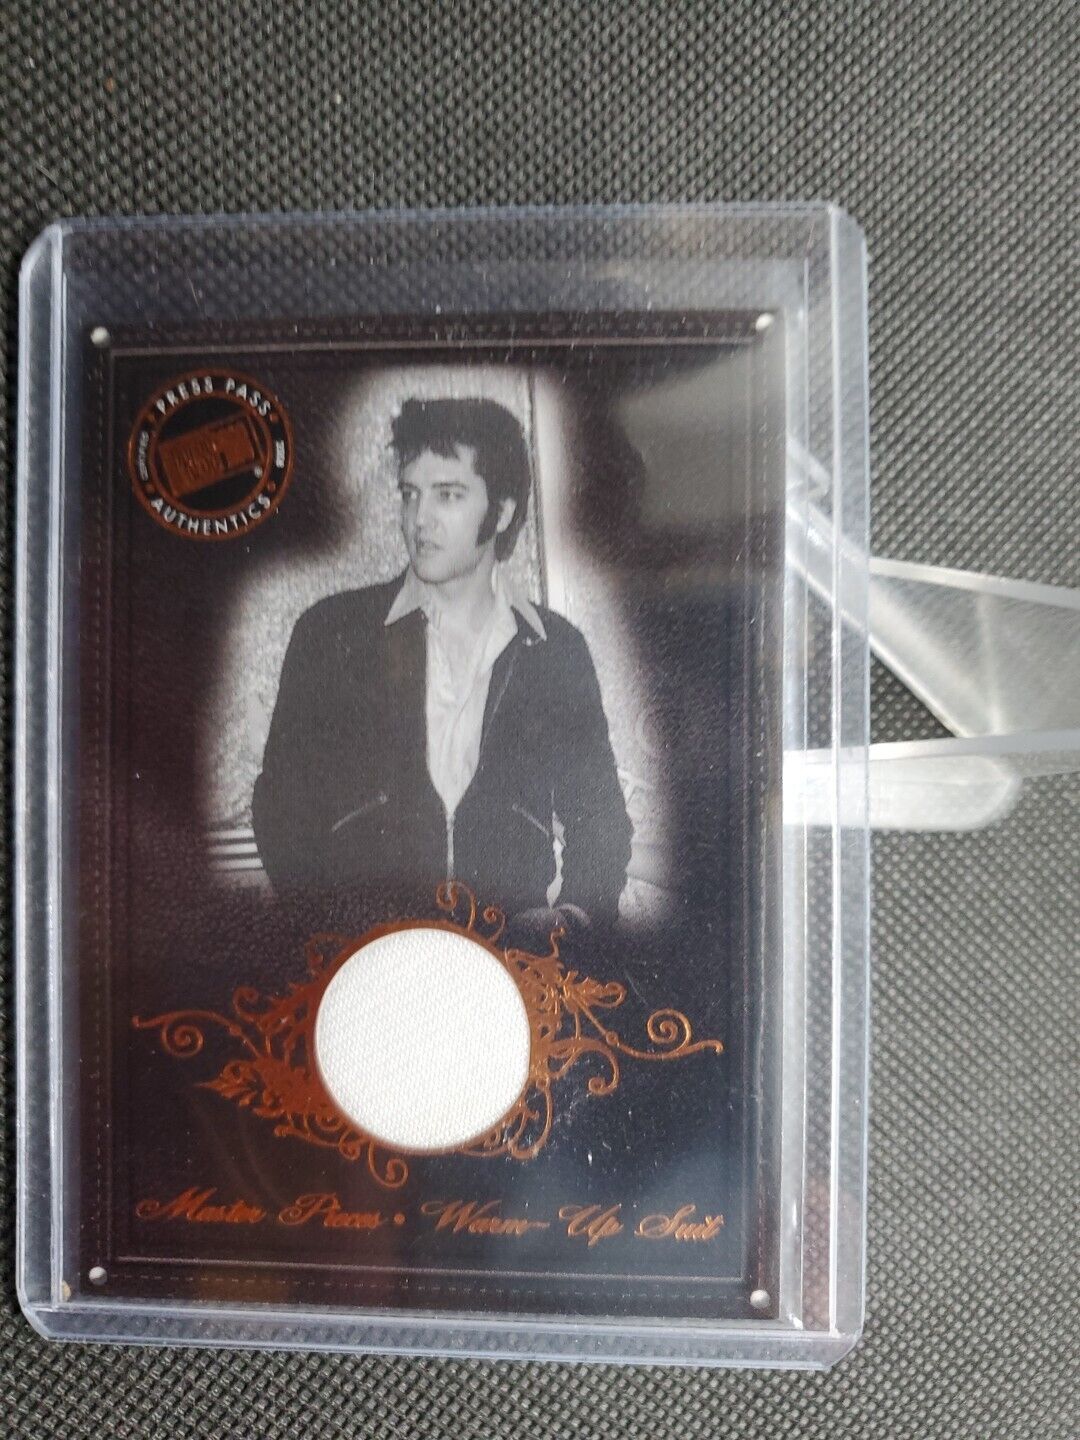 ELVIS PRESLEY 2008 PRESS PASS BY THE NUMBERS WORN WARM-UP SUIT RELIC